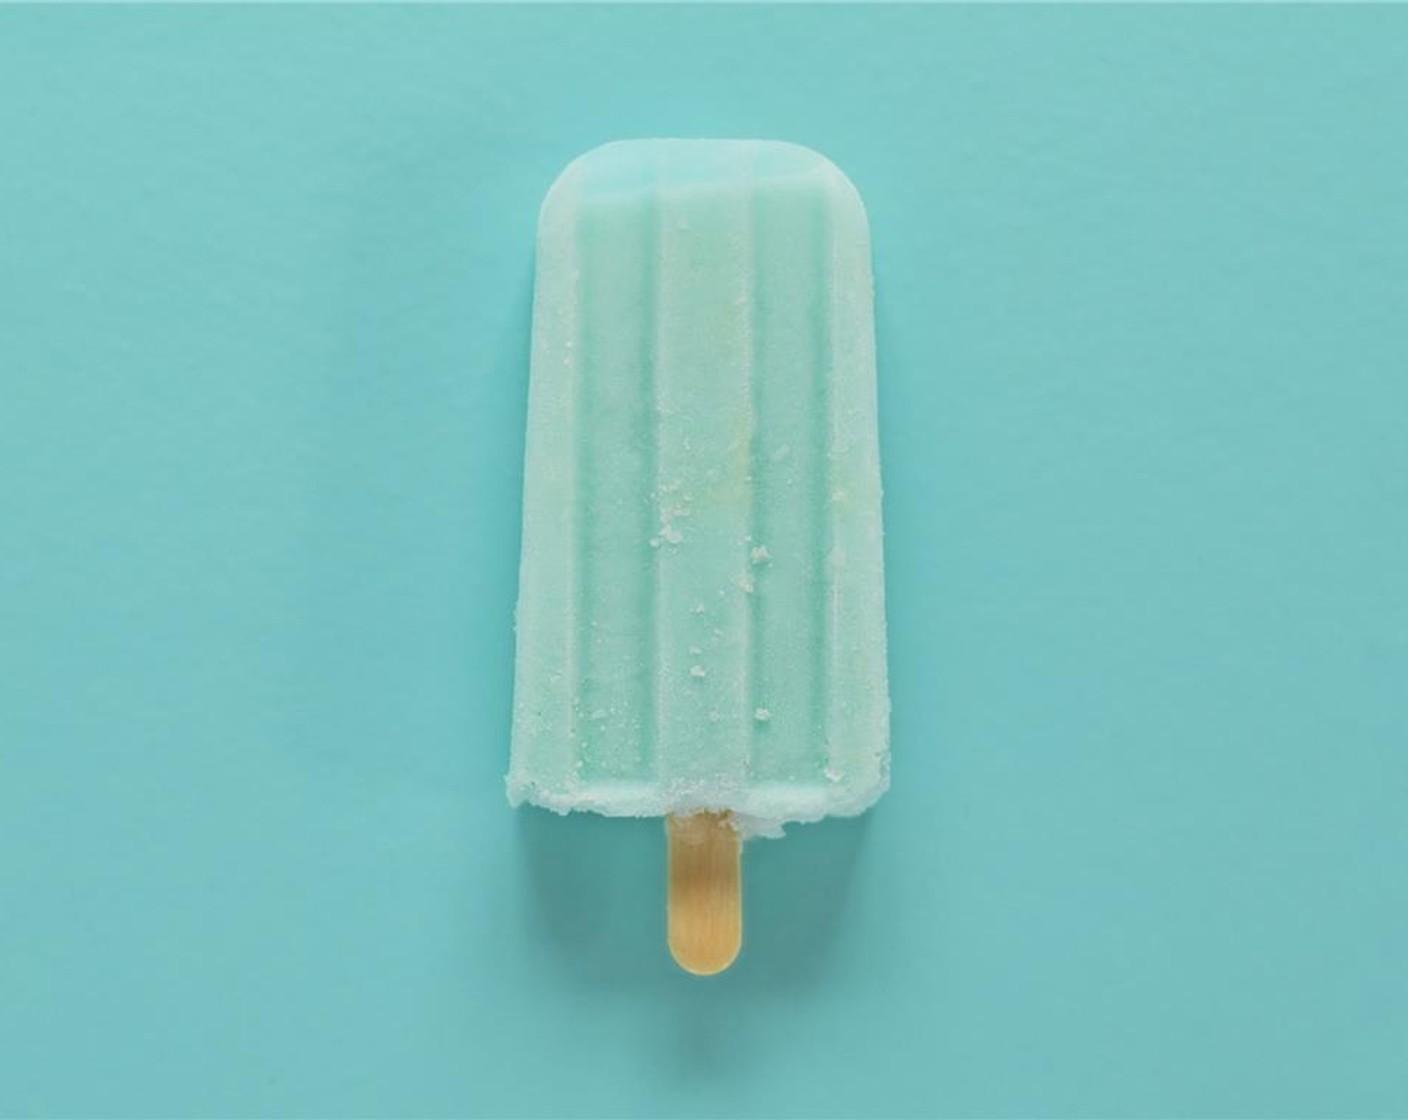 step 3 Keep your Blue Curaçao Piña Colada Popsicle chill before serving. Enjoy!